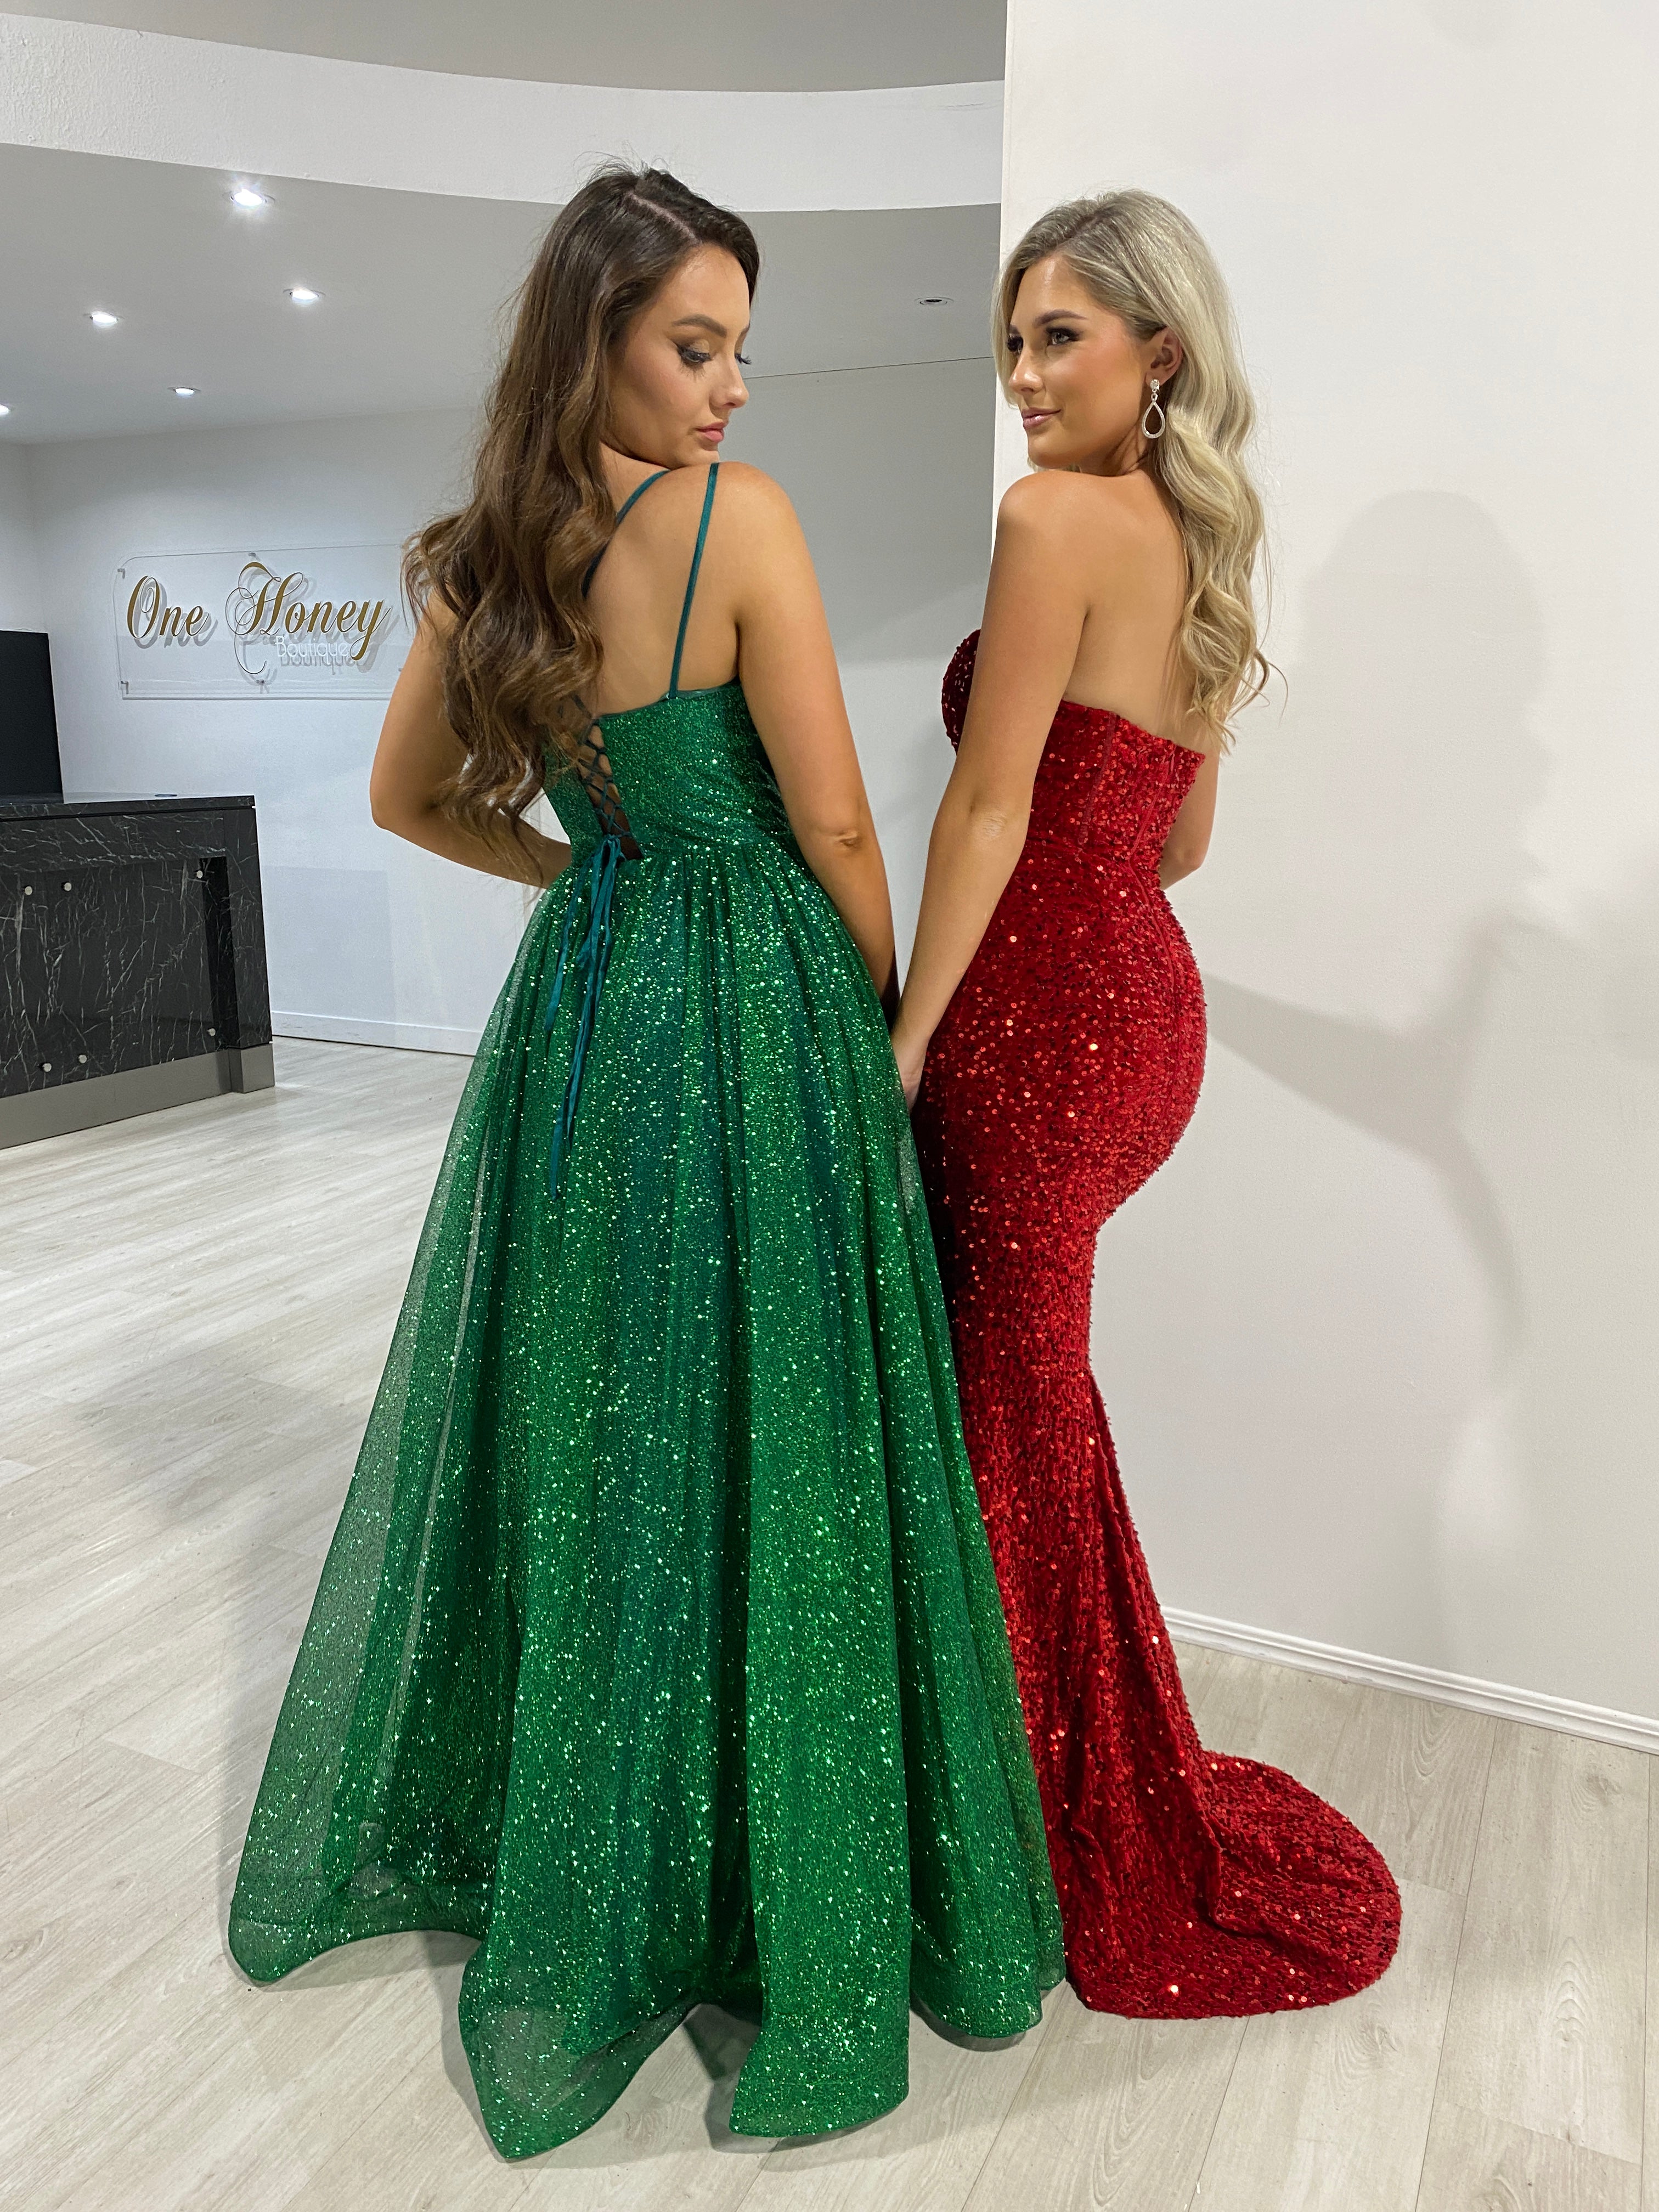 Buy Eilemy Women's Elegant One Shoulder A-line Evening Gown Chiffon  Bridesmaid Prom Dress with Cape Sleeve Emerald Green US6 at Amazon.in